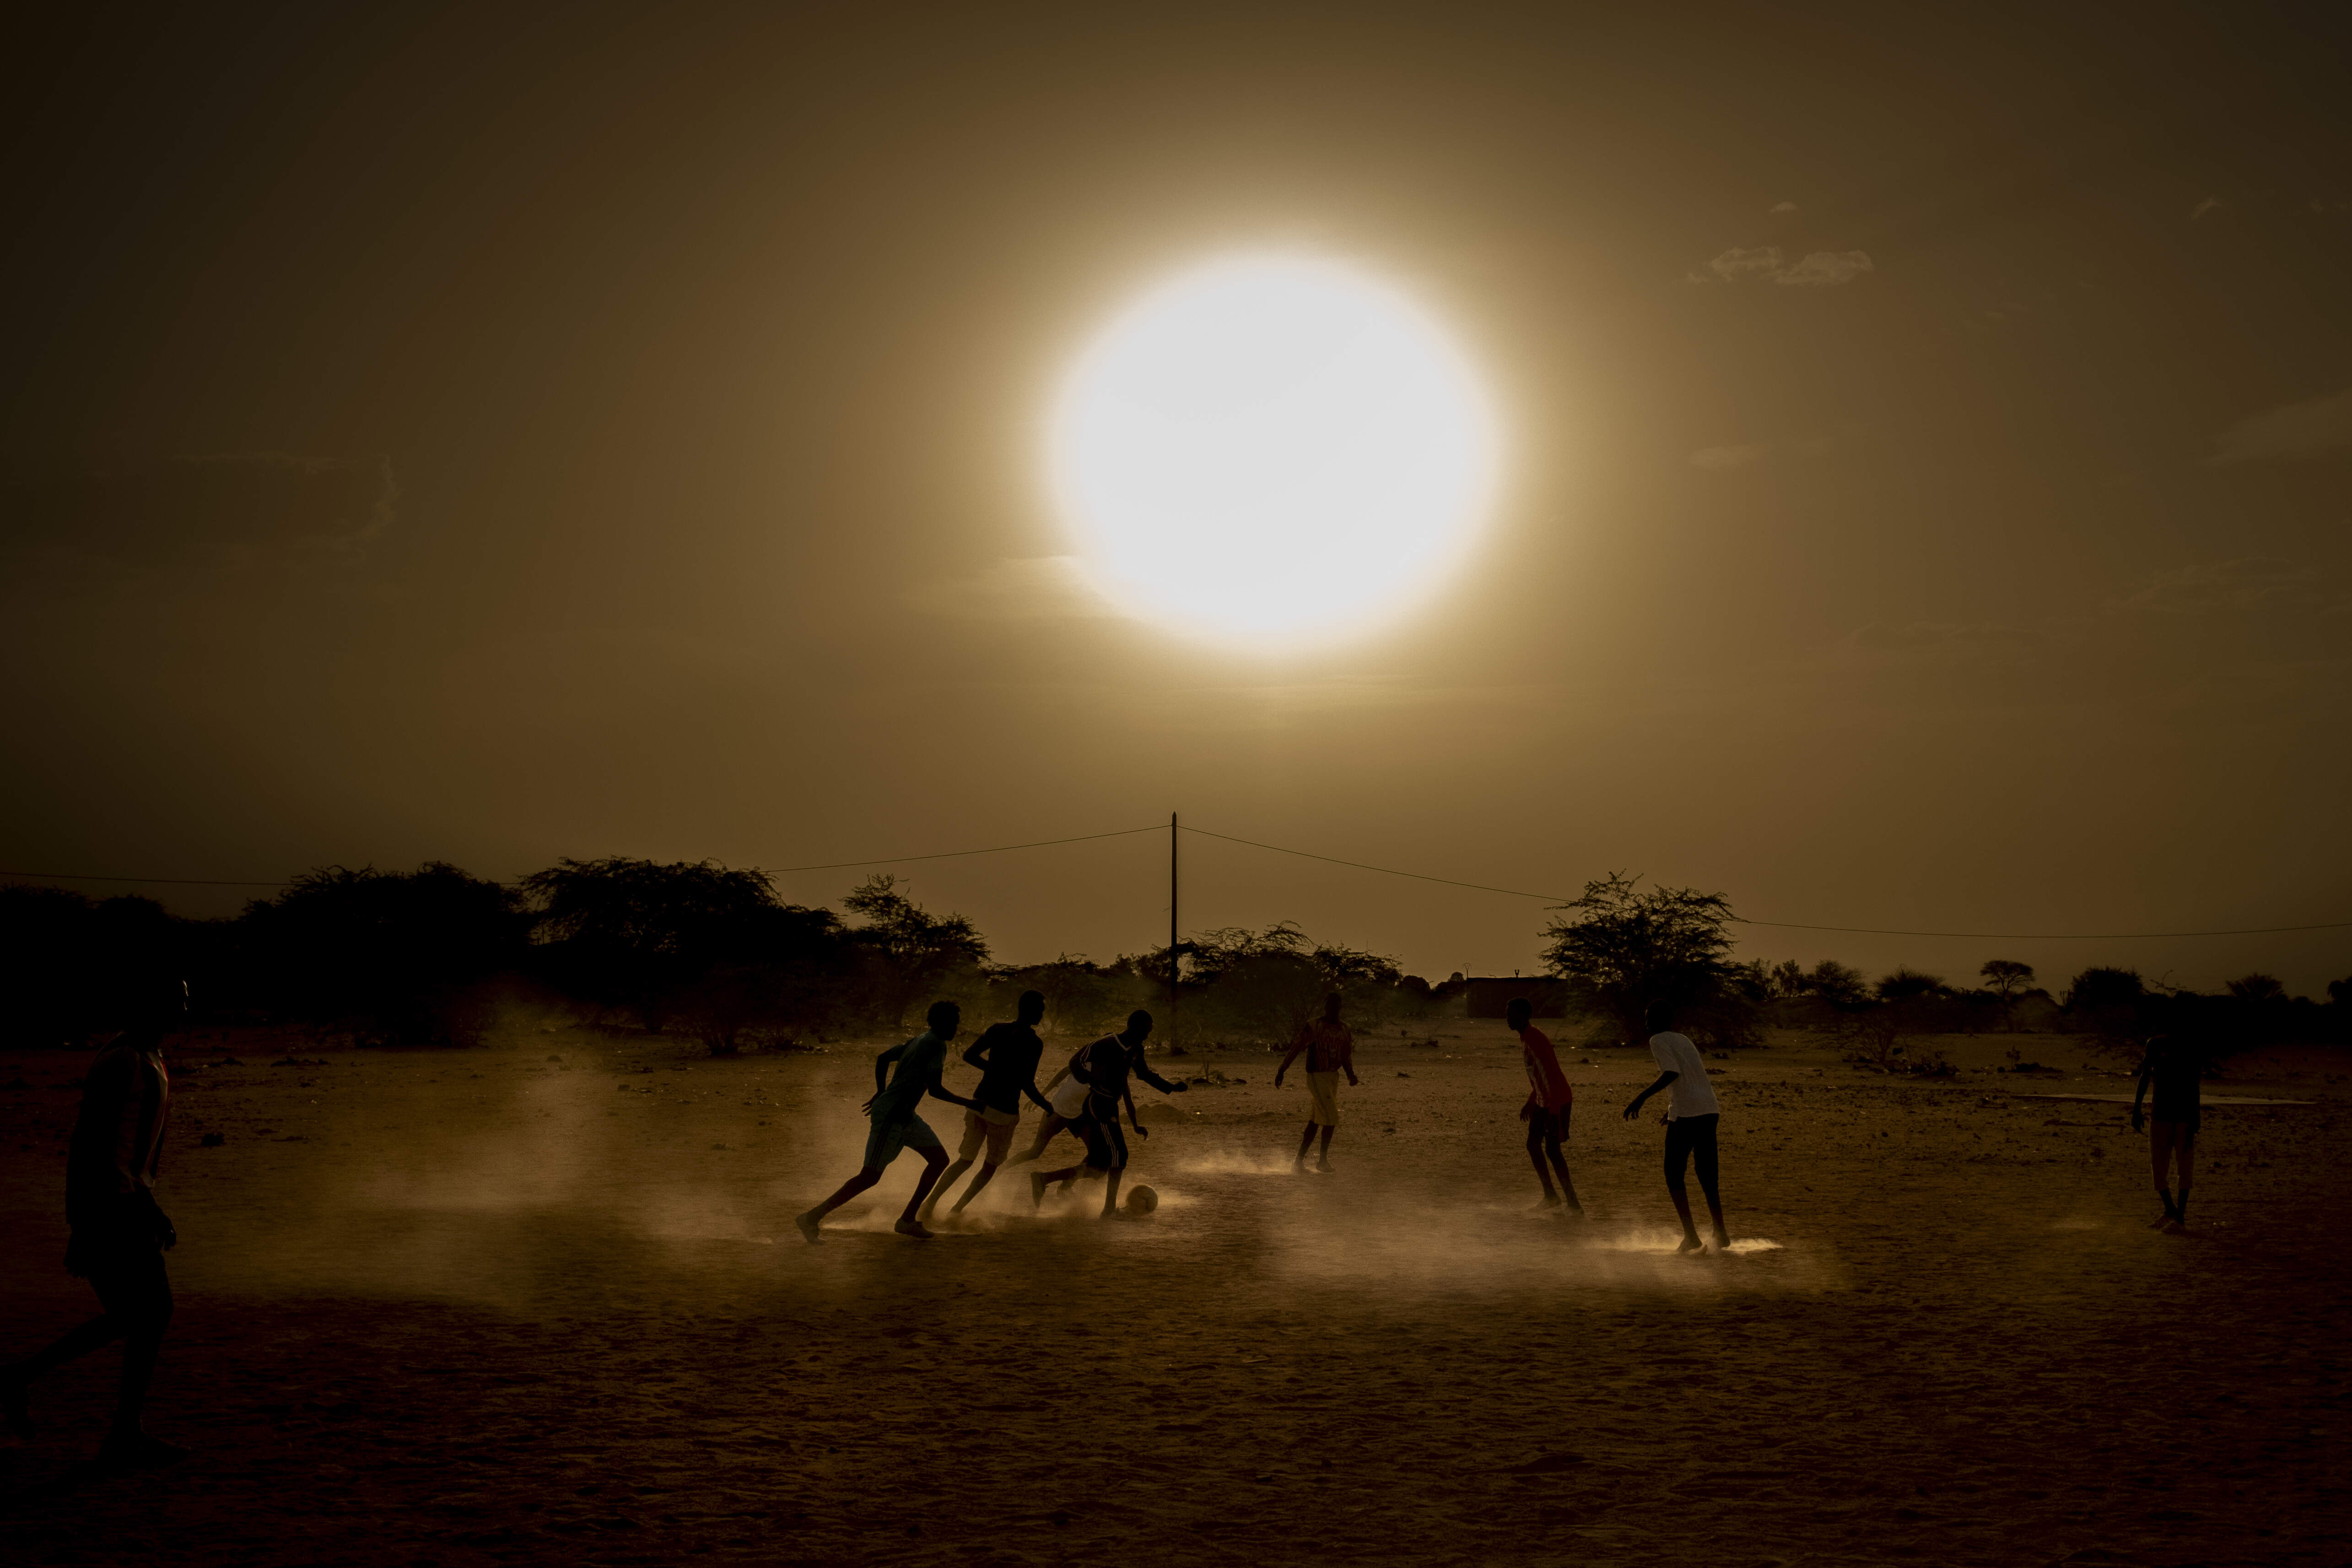 Sudanese migrants, children and men together, play football outside a 'hostel', provided by the United Nations, for migrants who are being forcibly sent home from Algeria and Libya in Agadez, Niger, on May 11, 2018. In May 2018, between the sun and the dusty wind, the temperatures in Agadez, Niger are about 45 degrees celsius. The region is known for uranium and salt mines, though it has become infamous as the last way station for migrants and refugees who are being smuggled to Europe, or Algeria and Libya